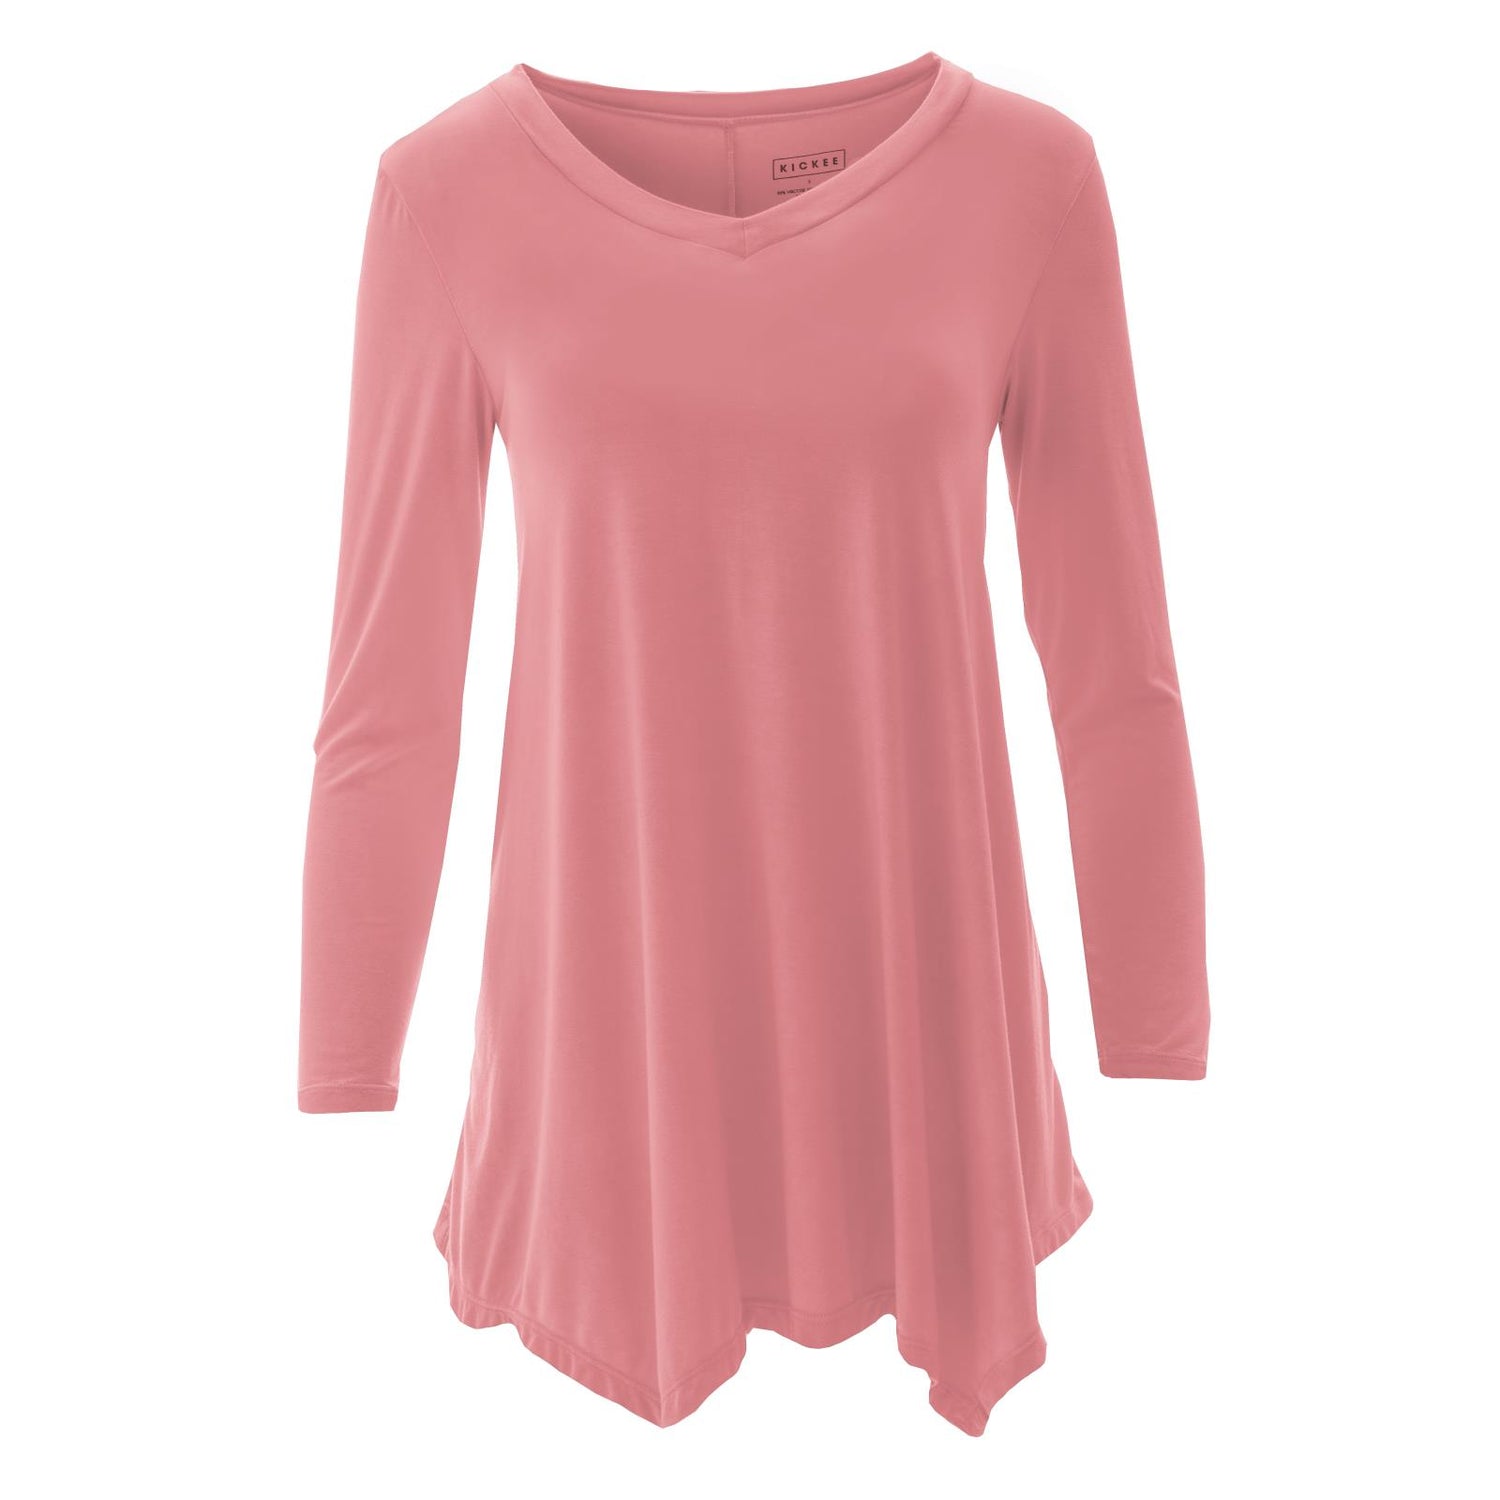 Women's Solid Long Sleeve Tunic in Strawberry